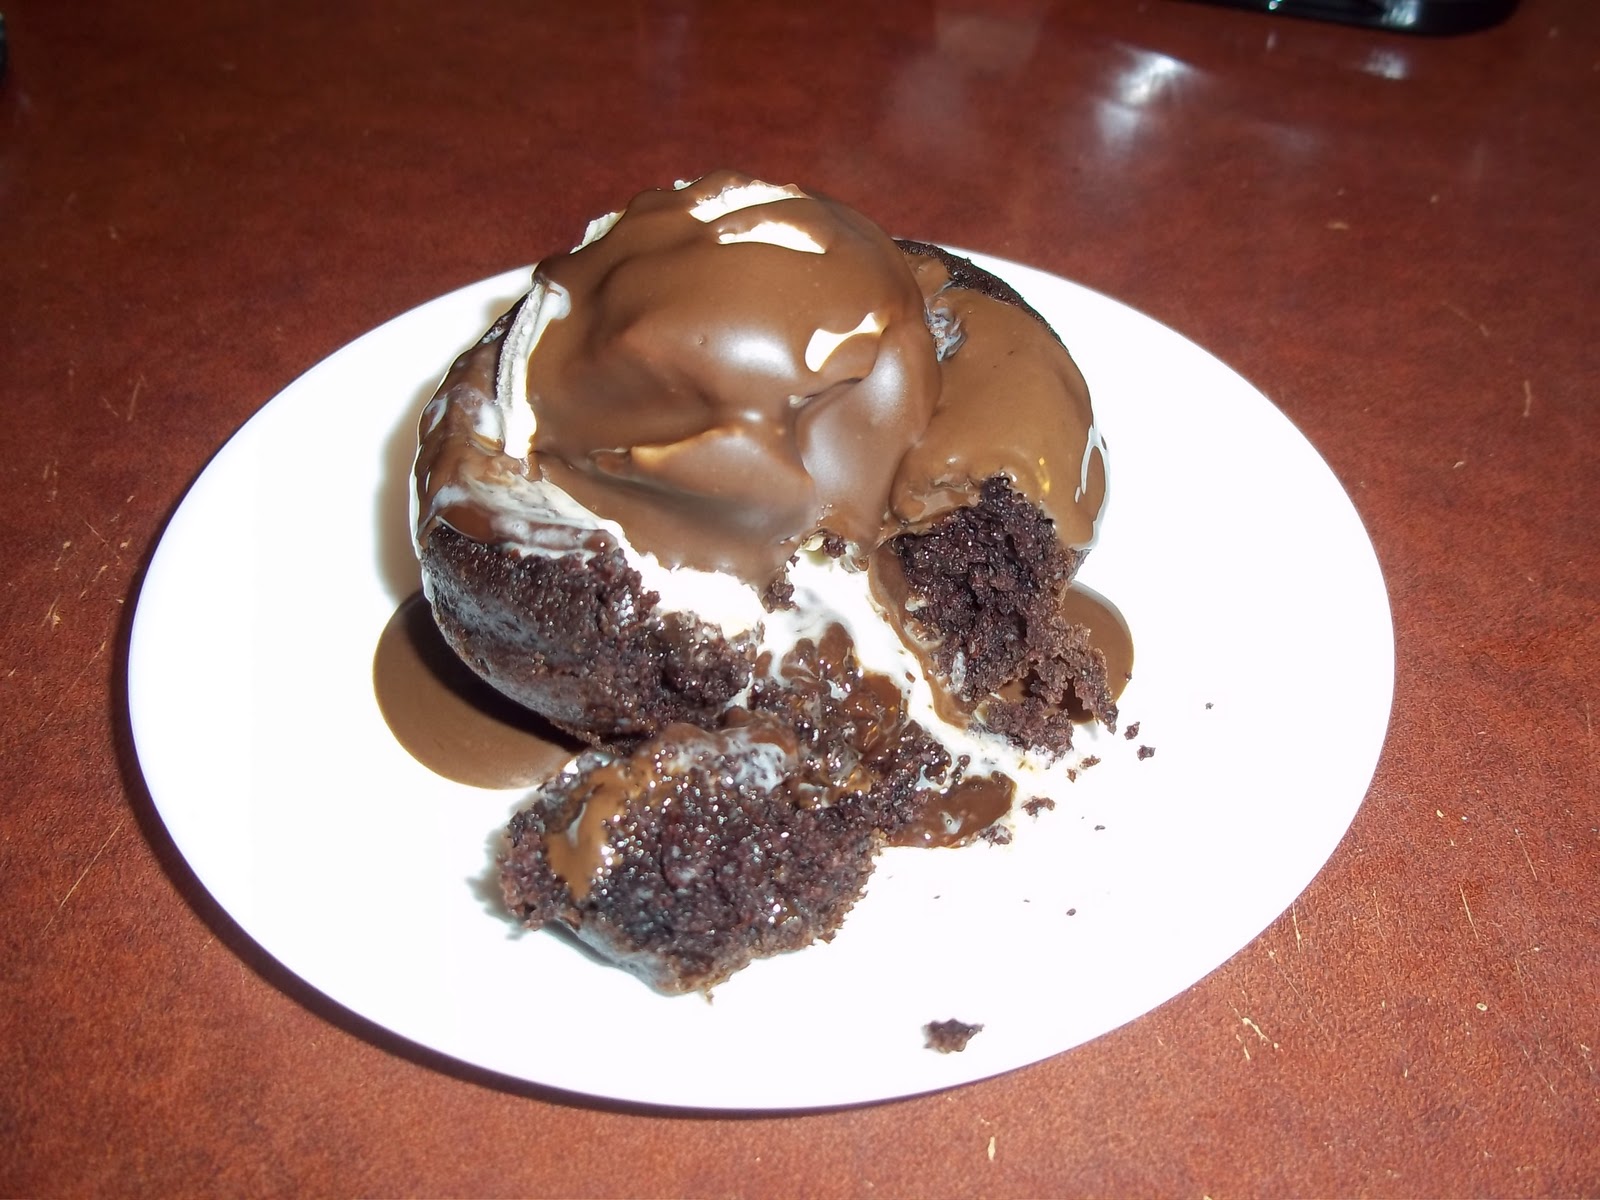 chocolate cake with ice cream Posted by The Daily Smash at 12:17 PM